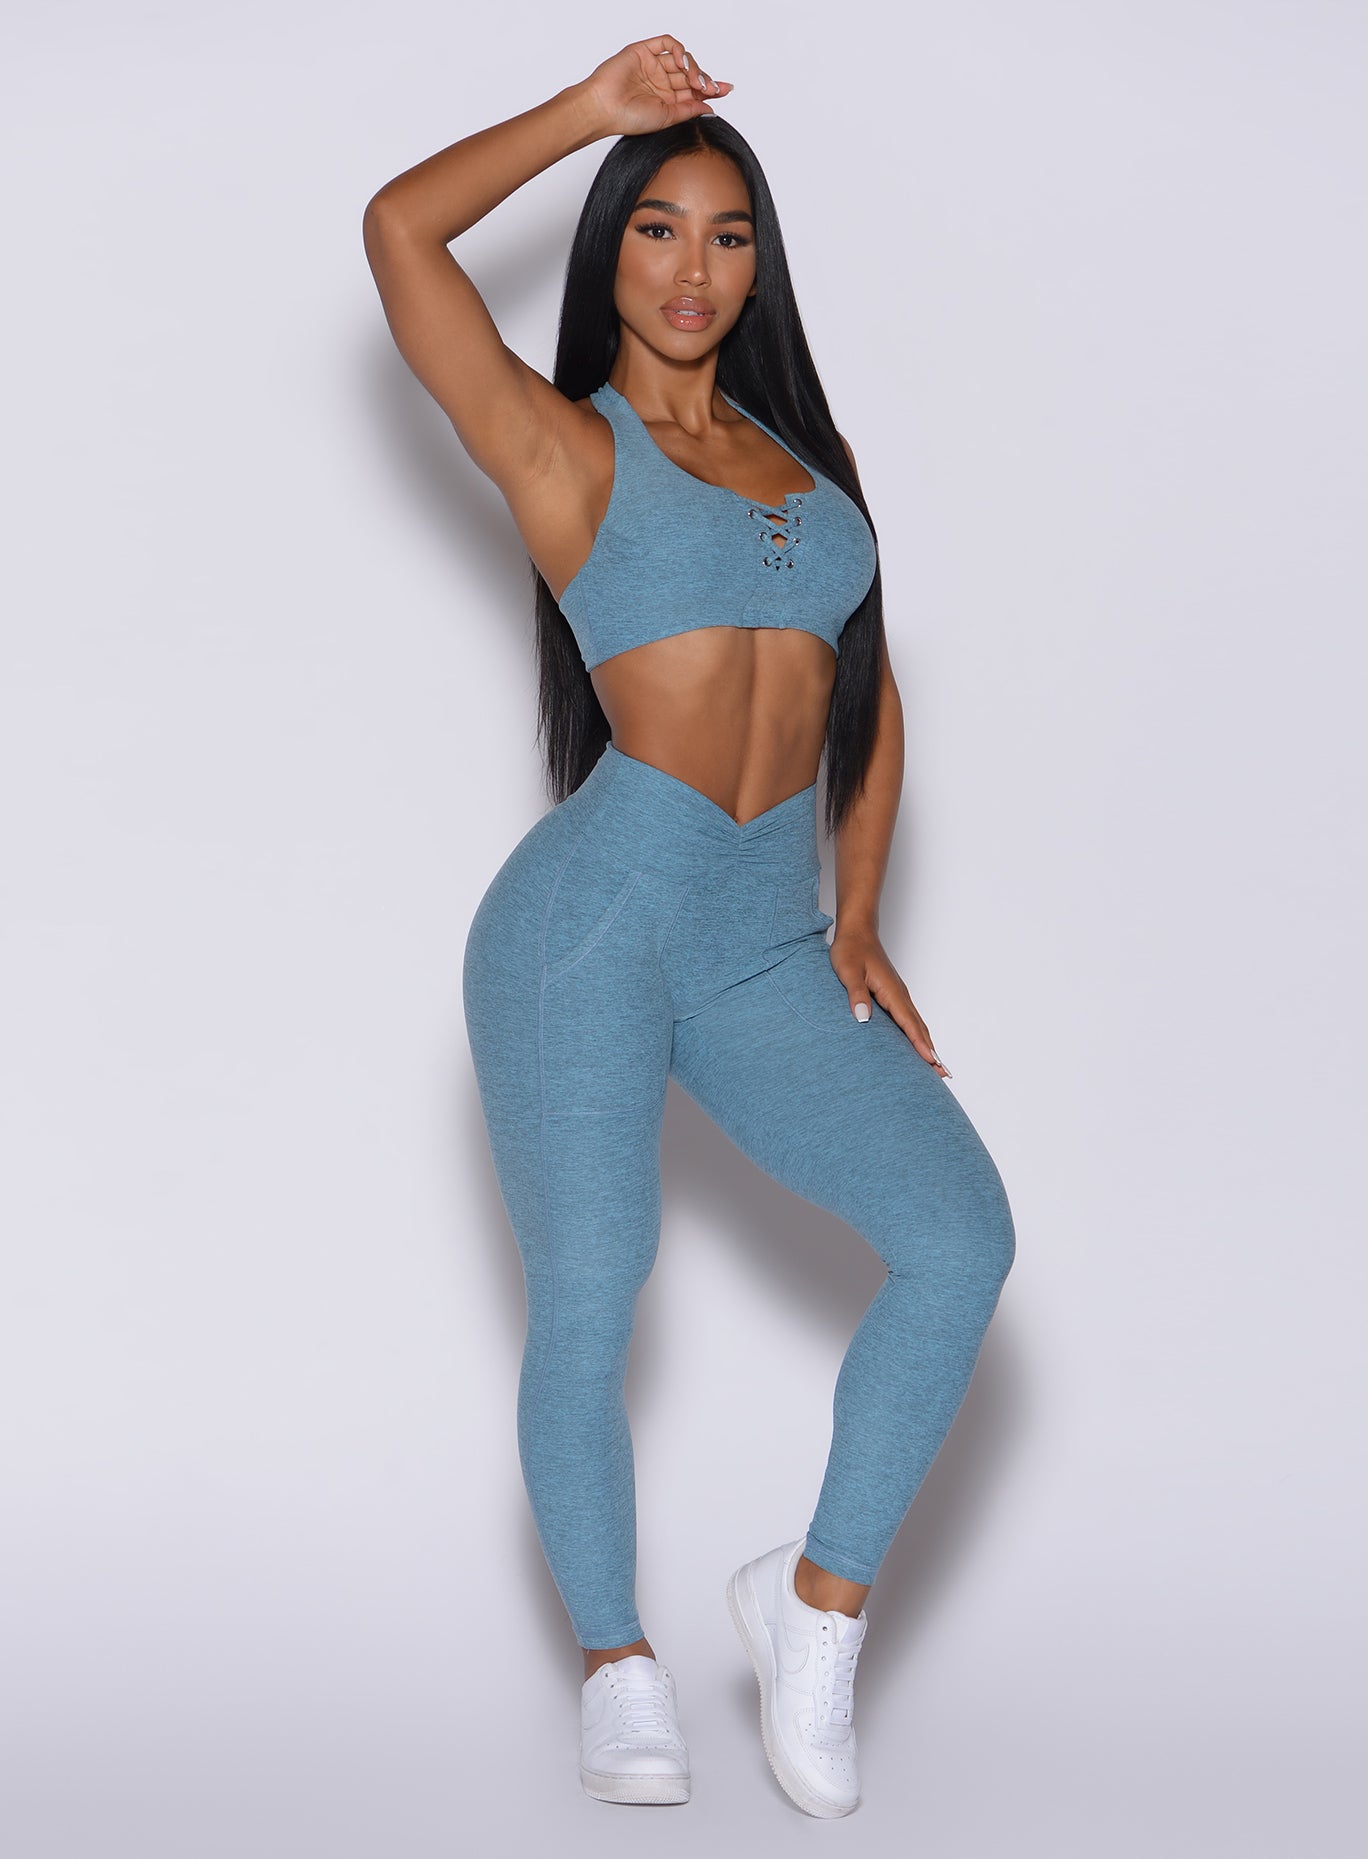 Front profile view of a model with her right hand over her head wearing our V scrunch leggings in baby blue color and a matching bra